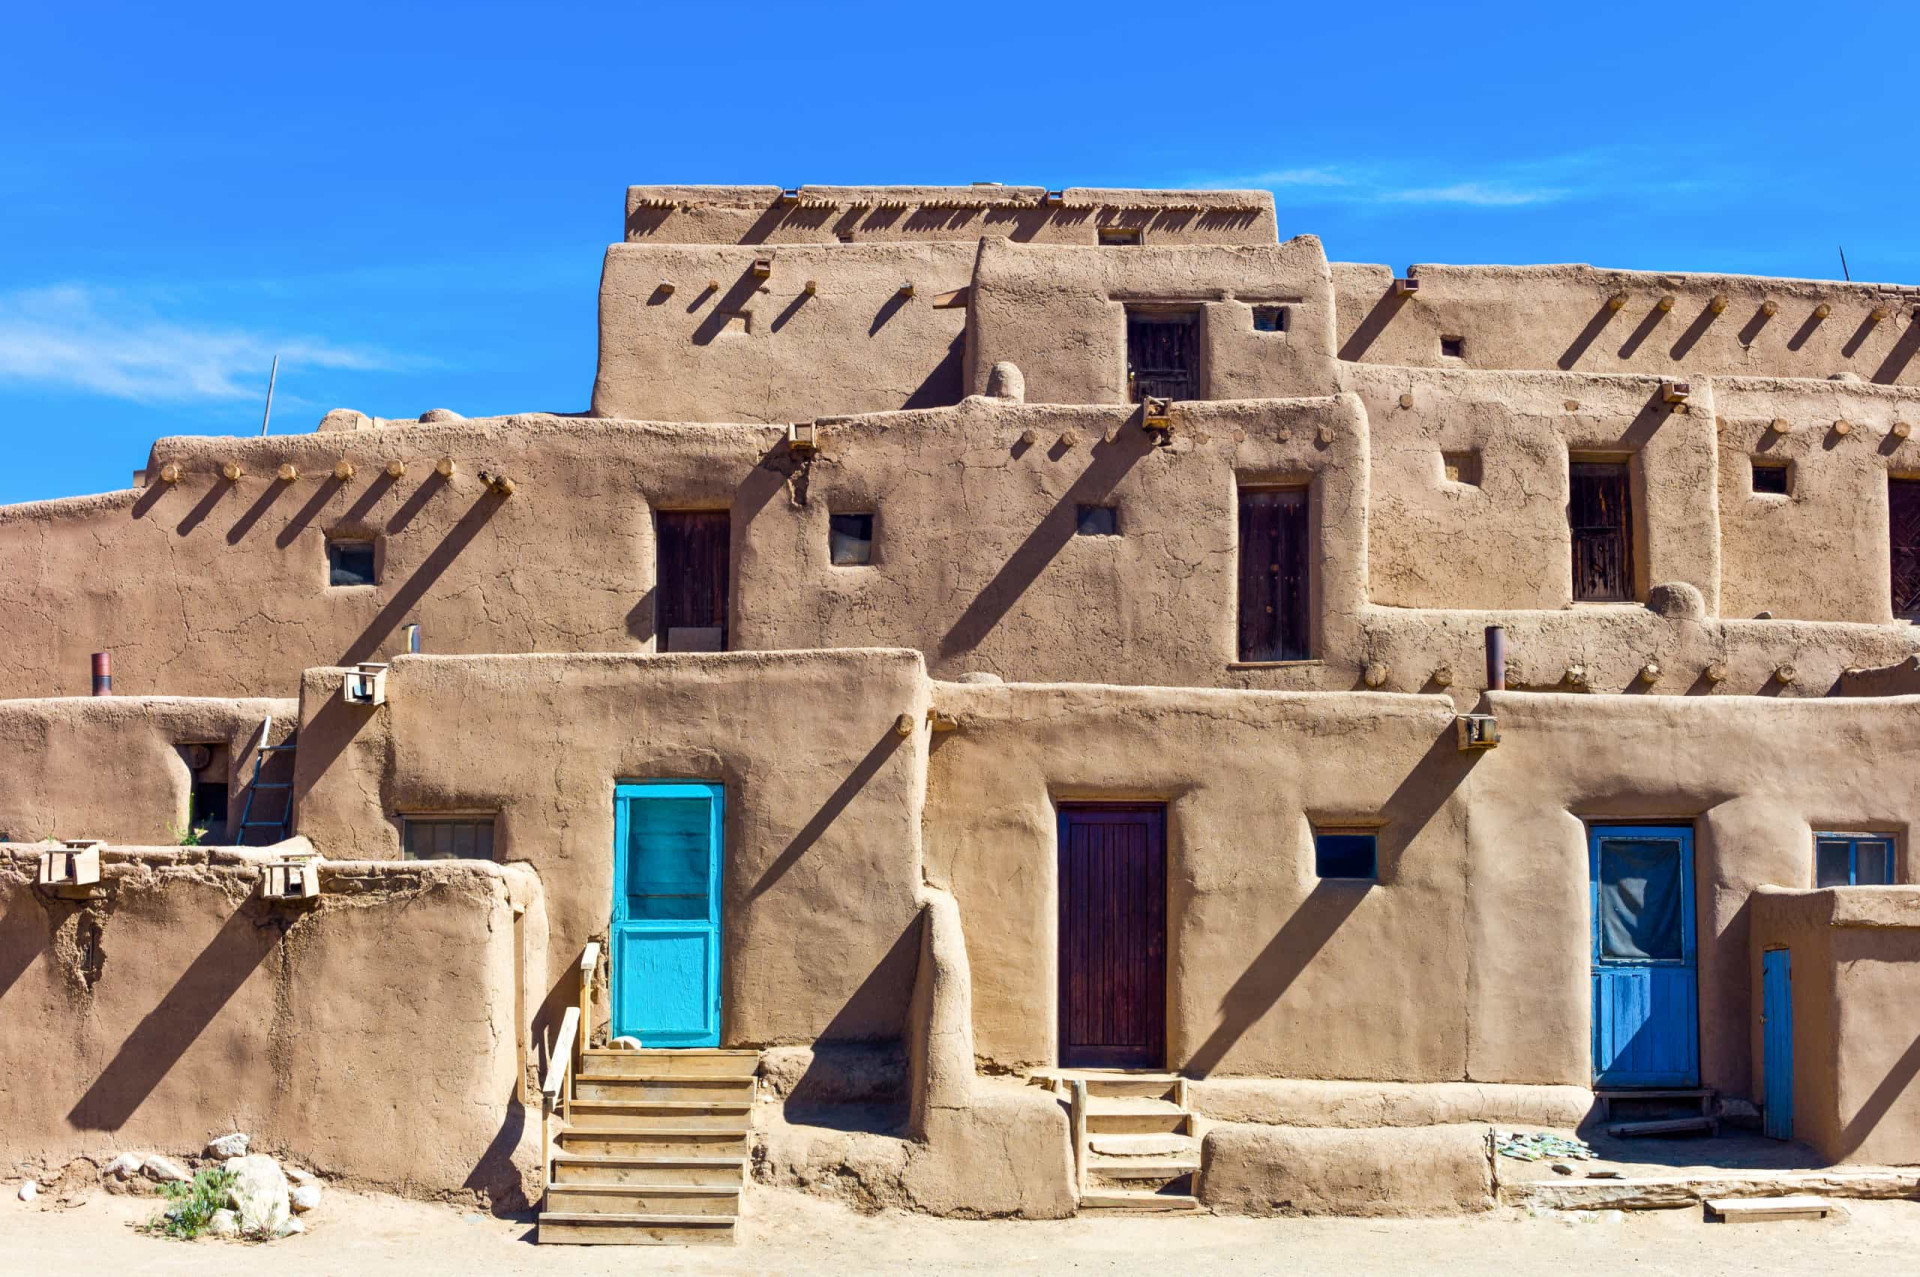 <p>New Mexico is home to the oldest continuously-inhabited dwellings in the United States, the adobe structures of Taos Pueblo. The buildings date back to between 1000 and 1450, and the entire community is a designated UNESCO World Heritage Site.</p>